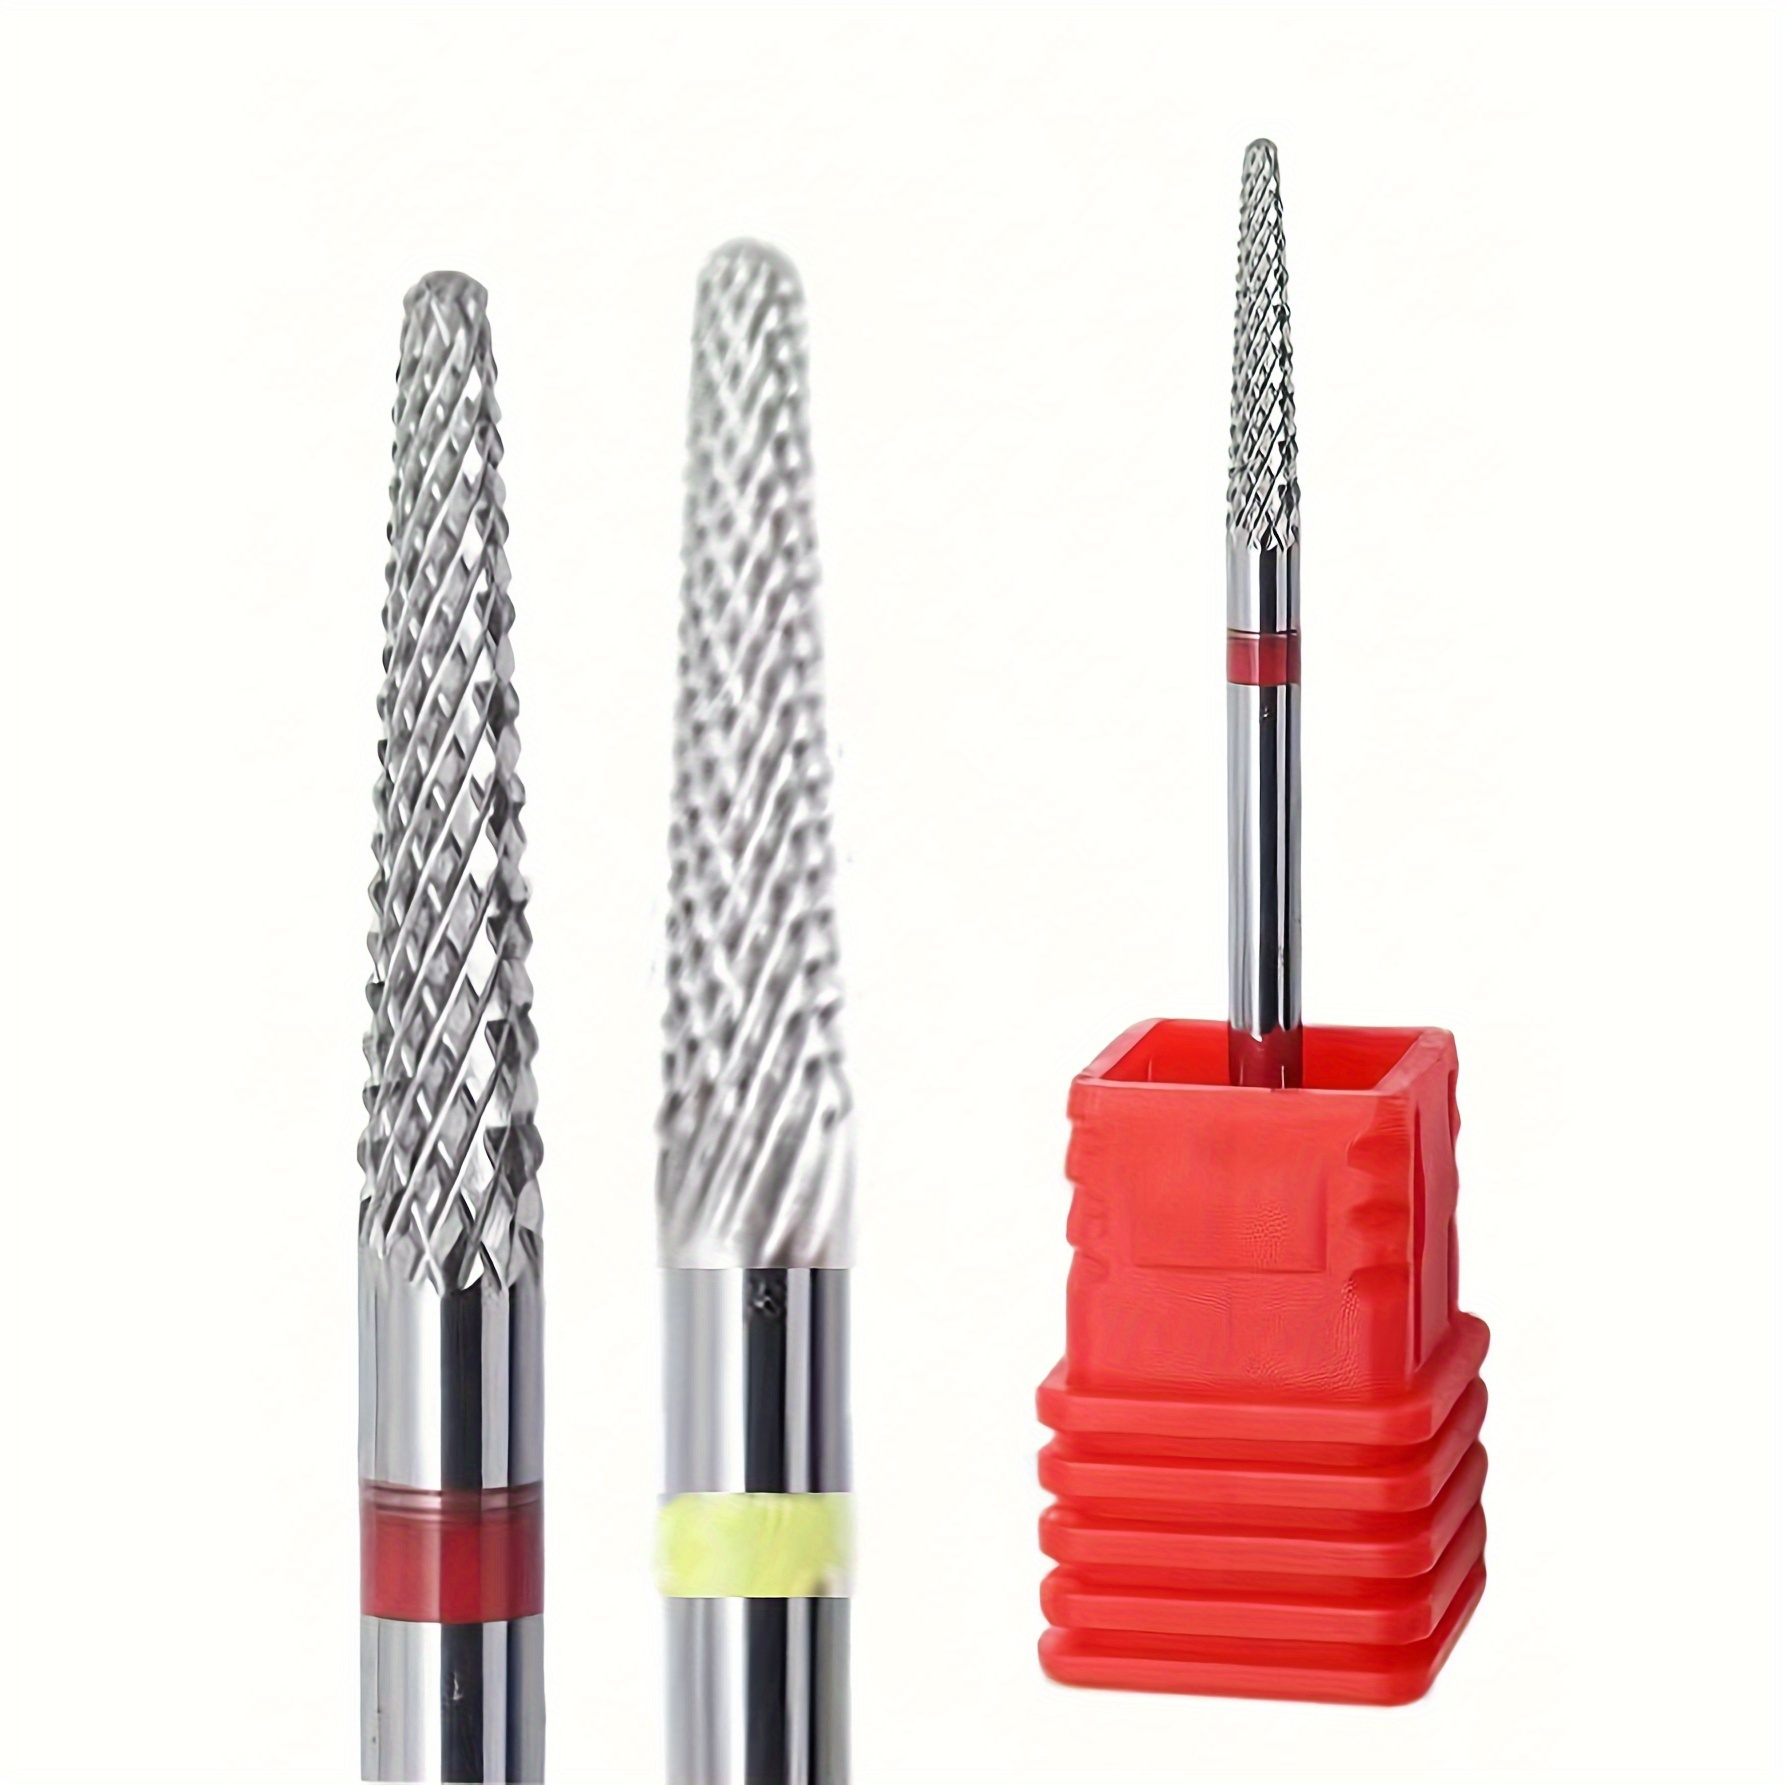 

Professional Carbide Nail Drill Bit, 3/32'' - Perfect For Manicure & Pedicure, Cuticle Gel Polishing, Beginner-friendly